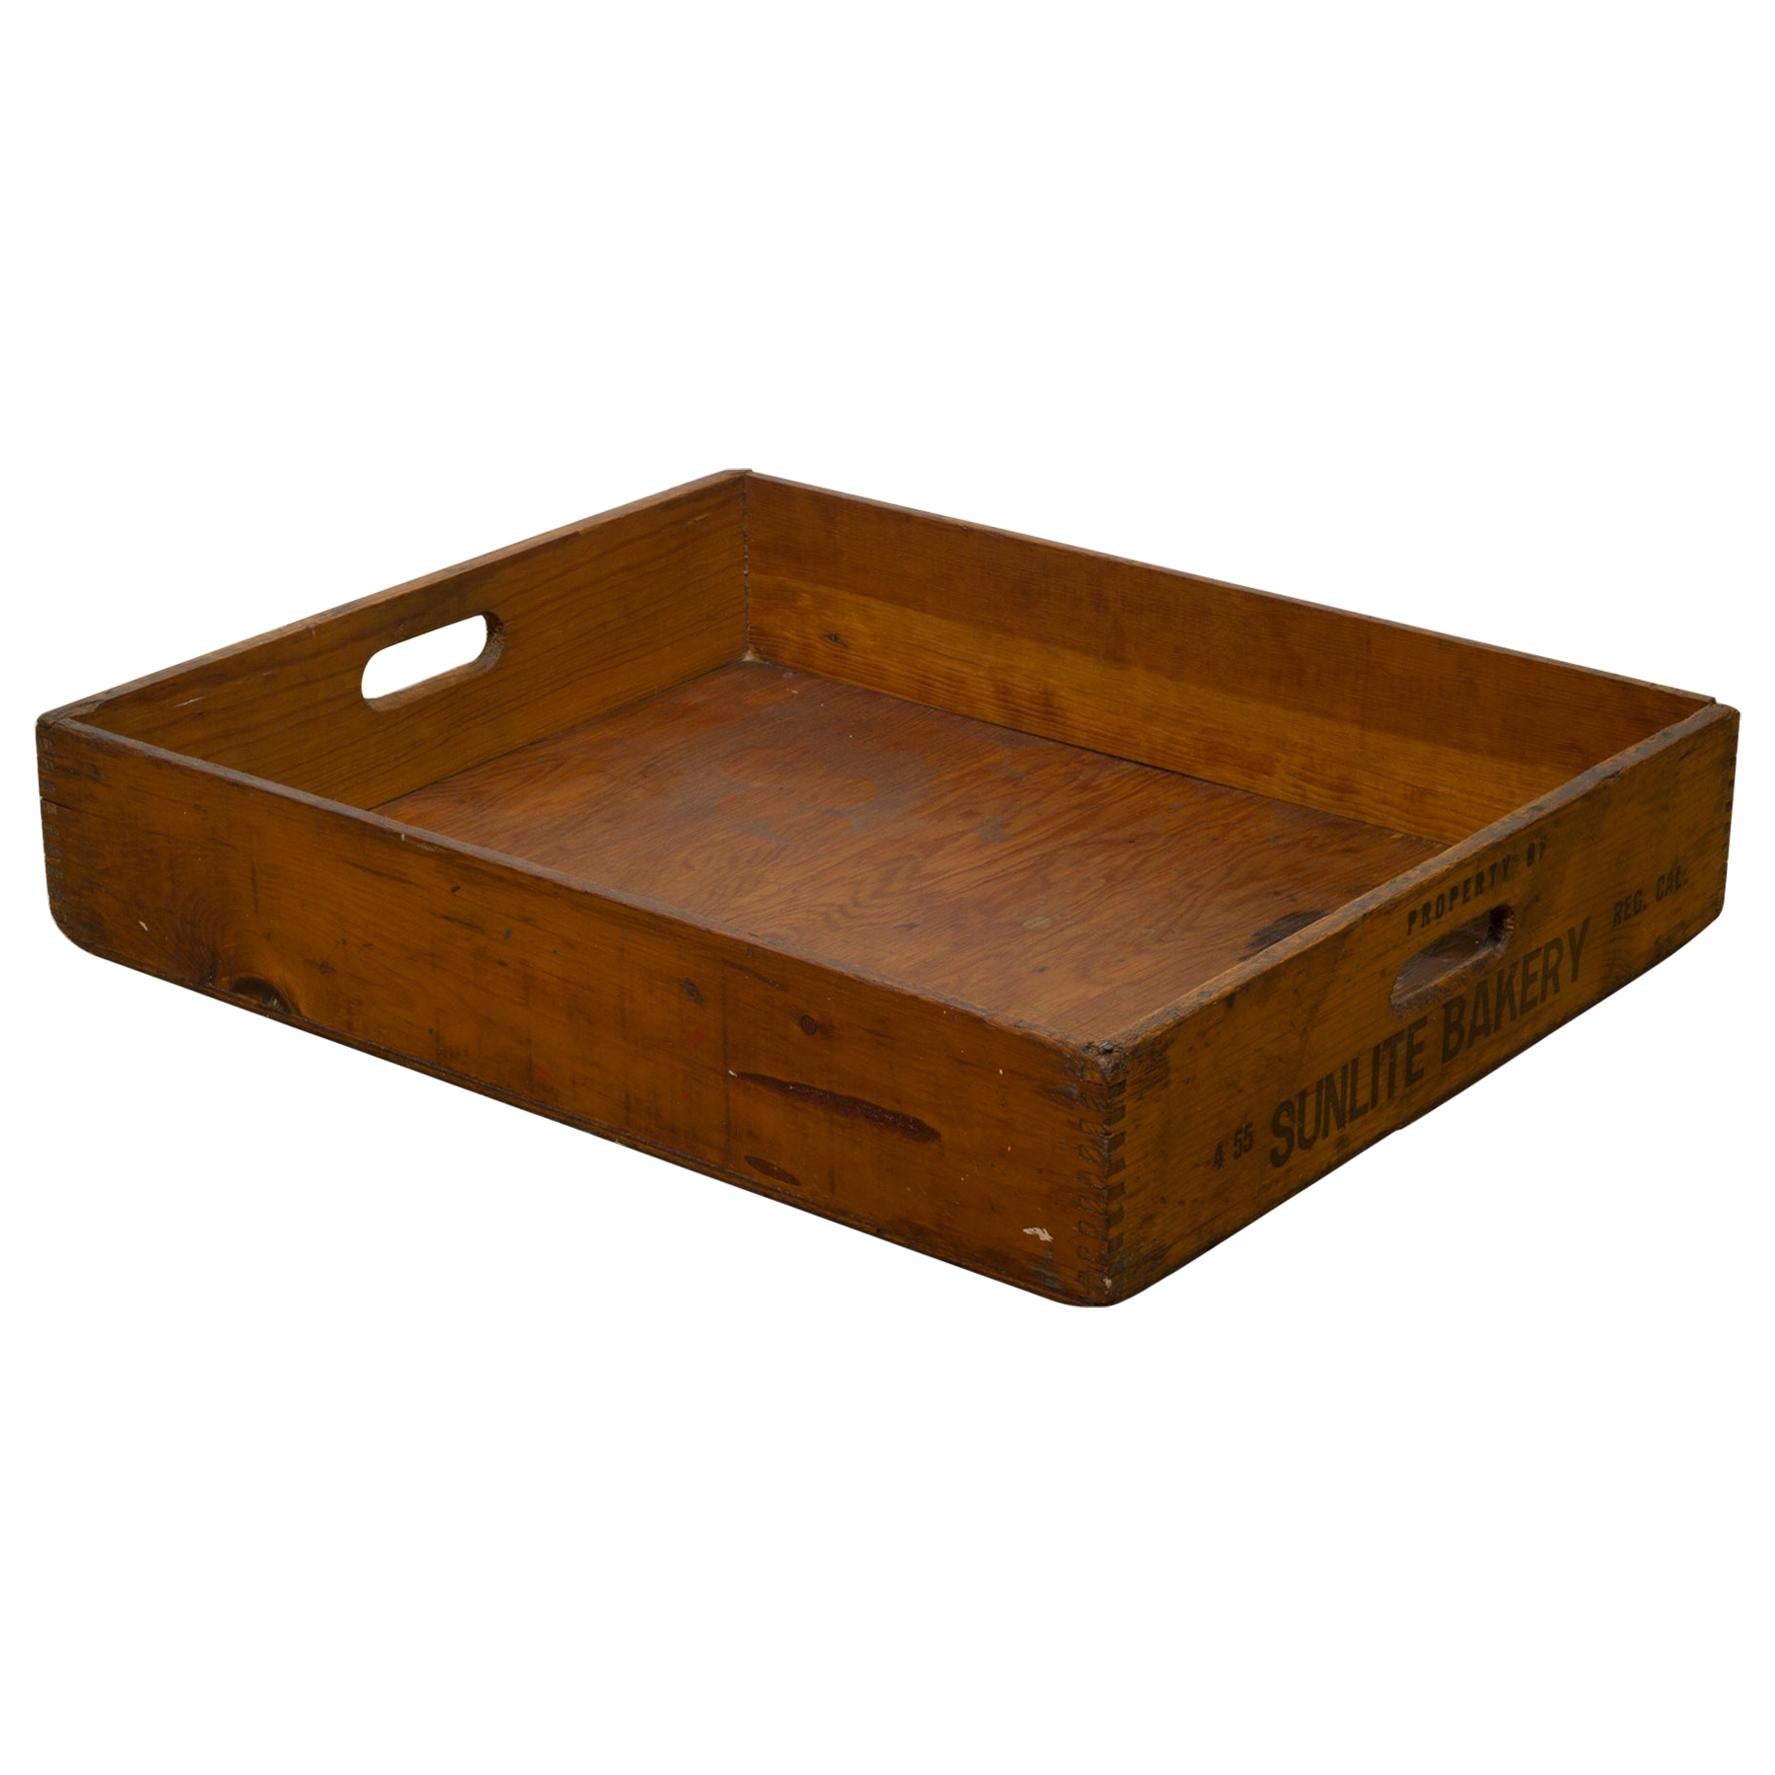 Early 20th Century Wooden Baker's Bread Tray with Dovetail Joints